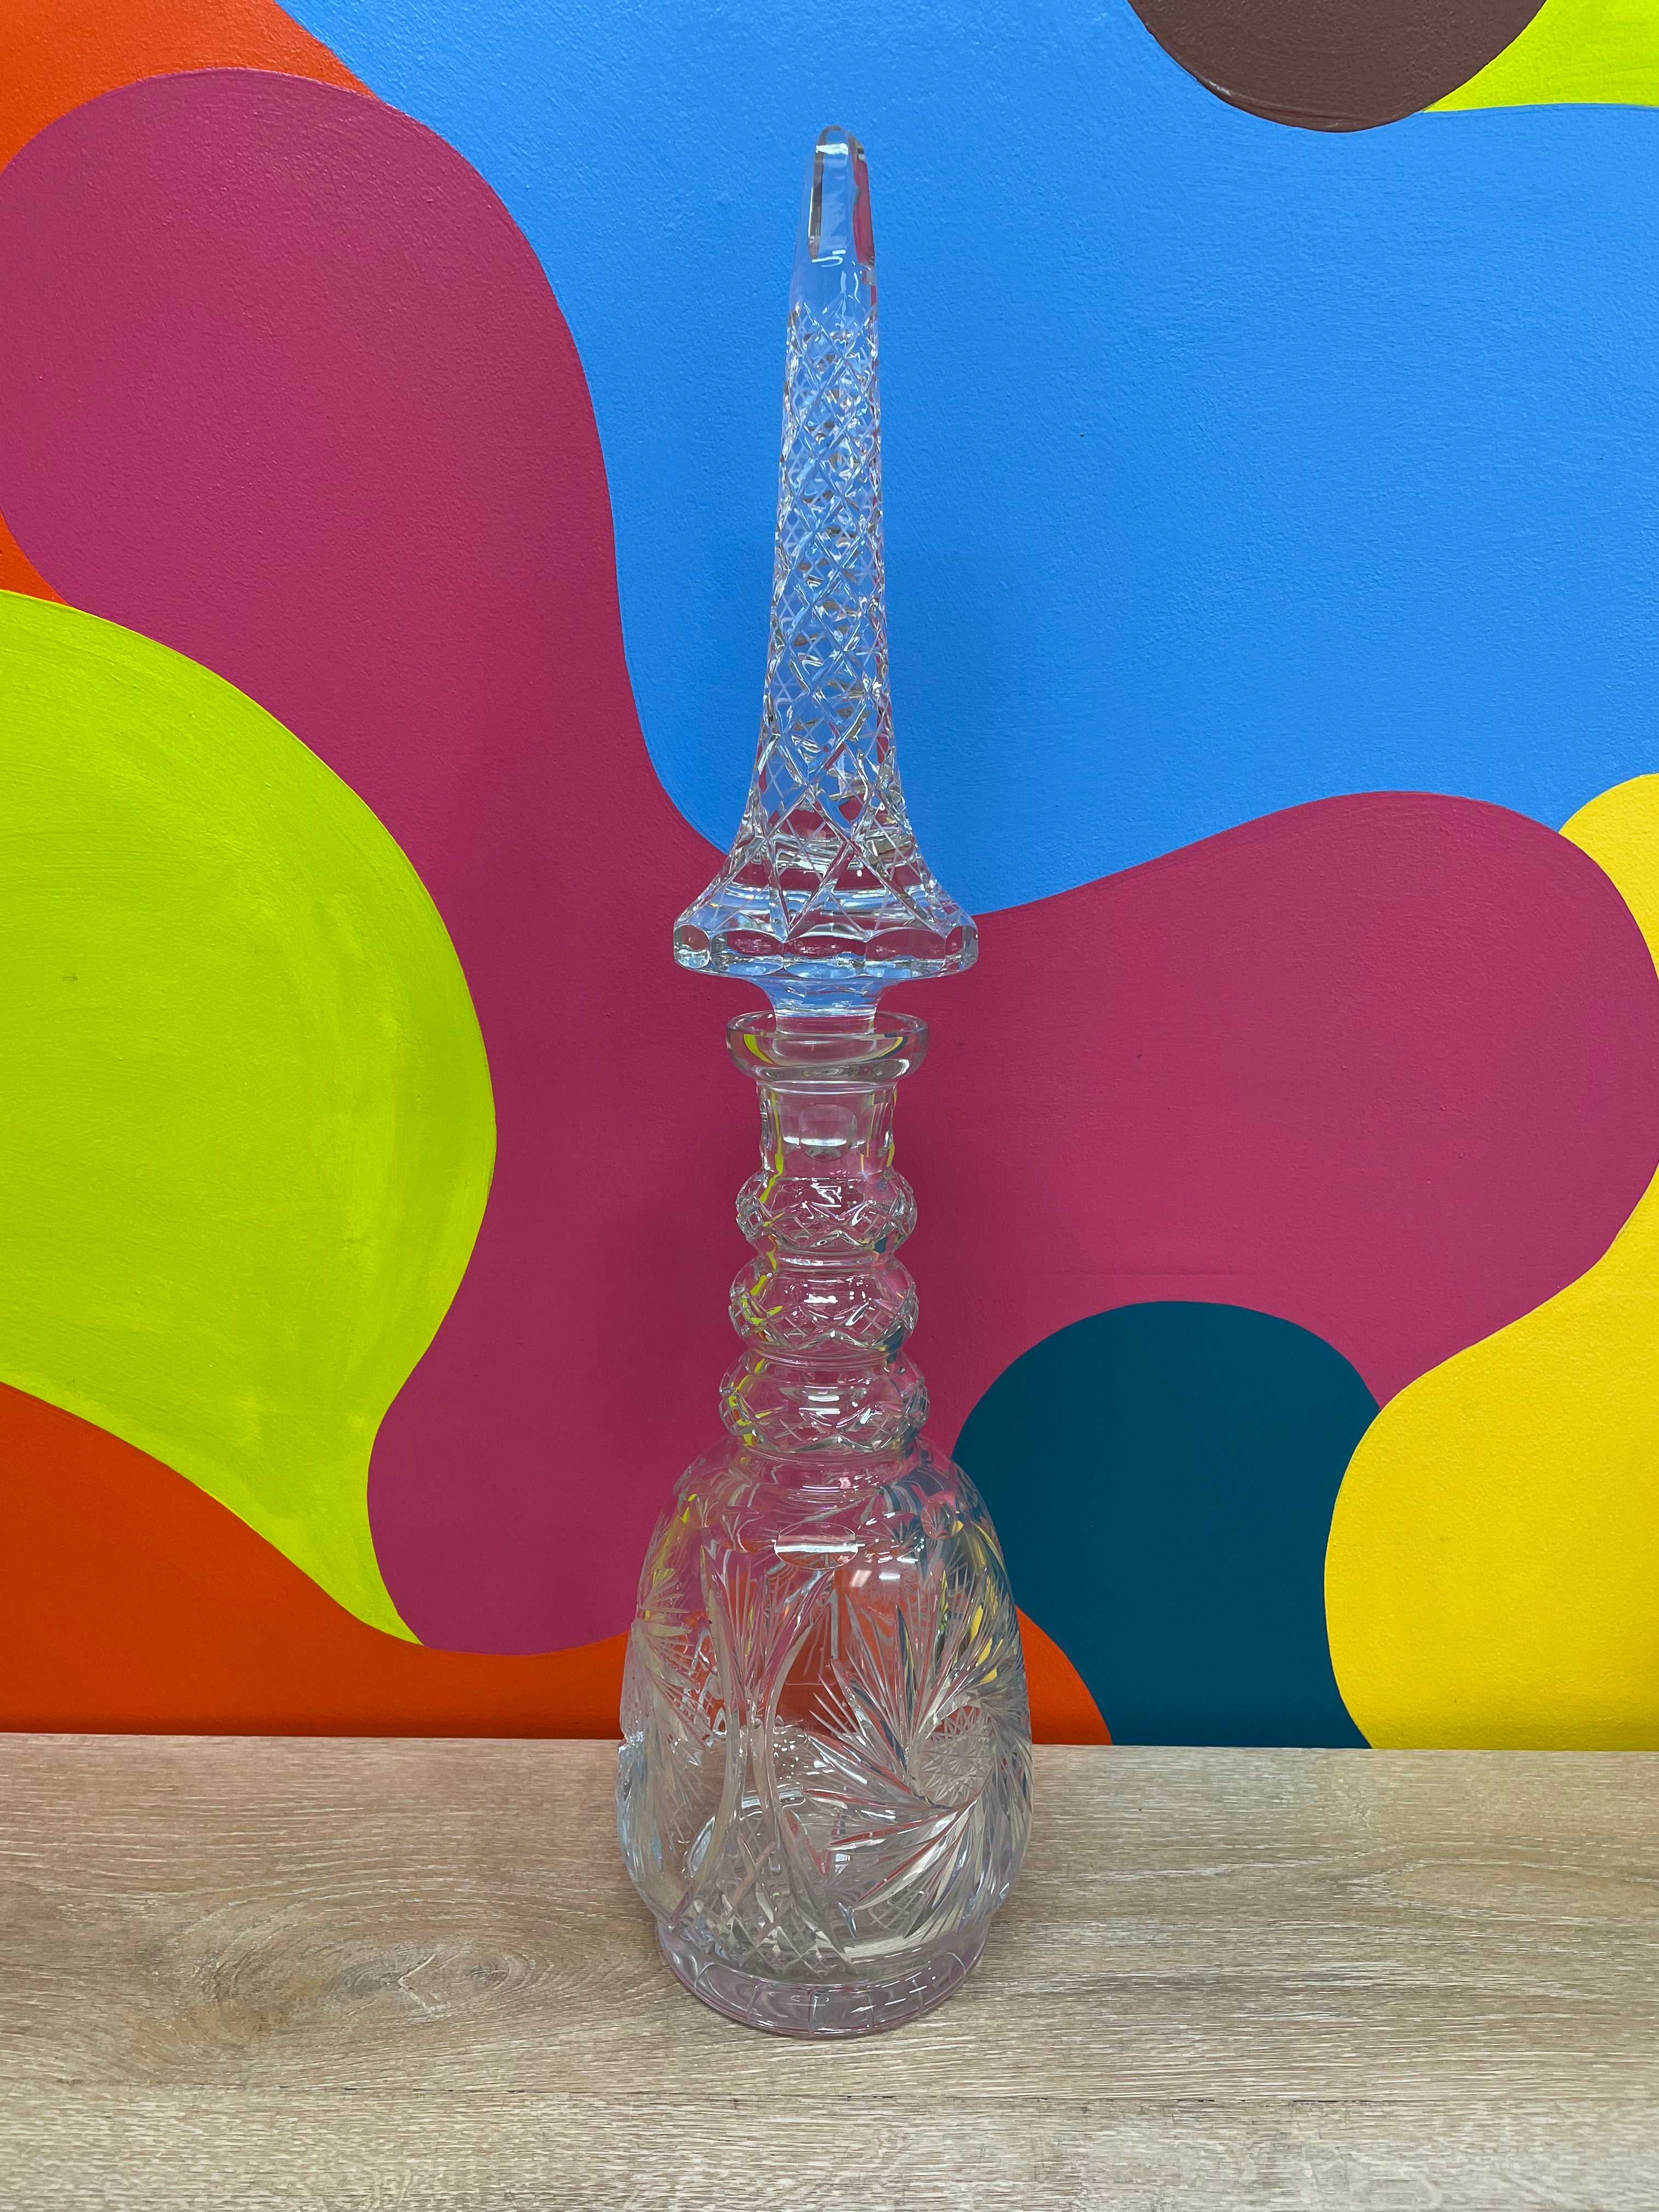 Extra Large Crystal Decanter - 27"